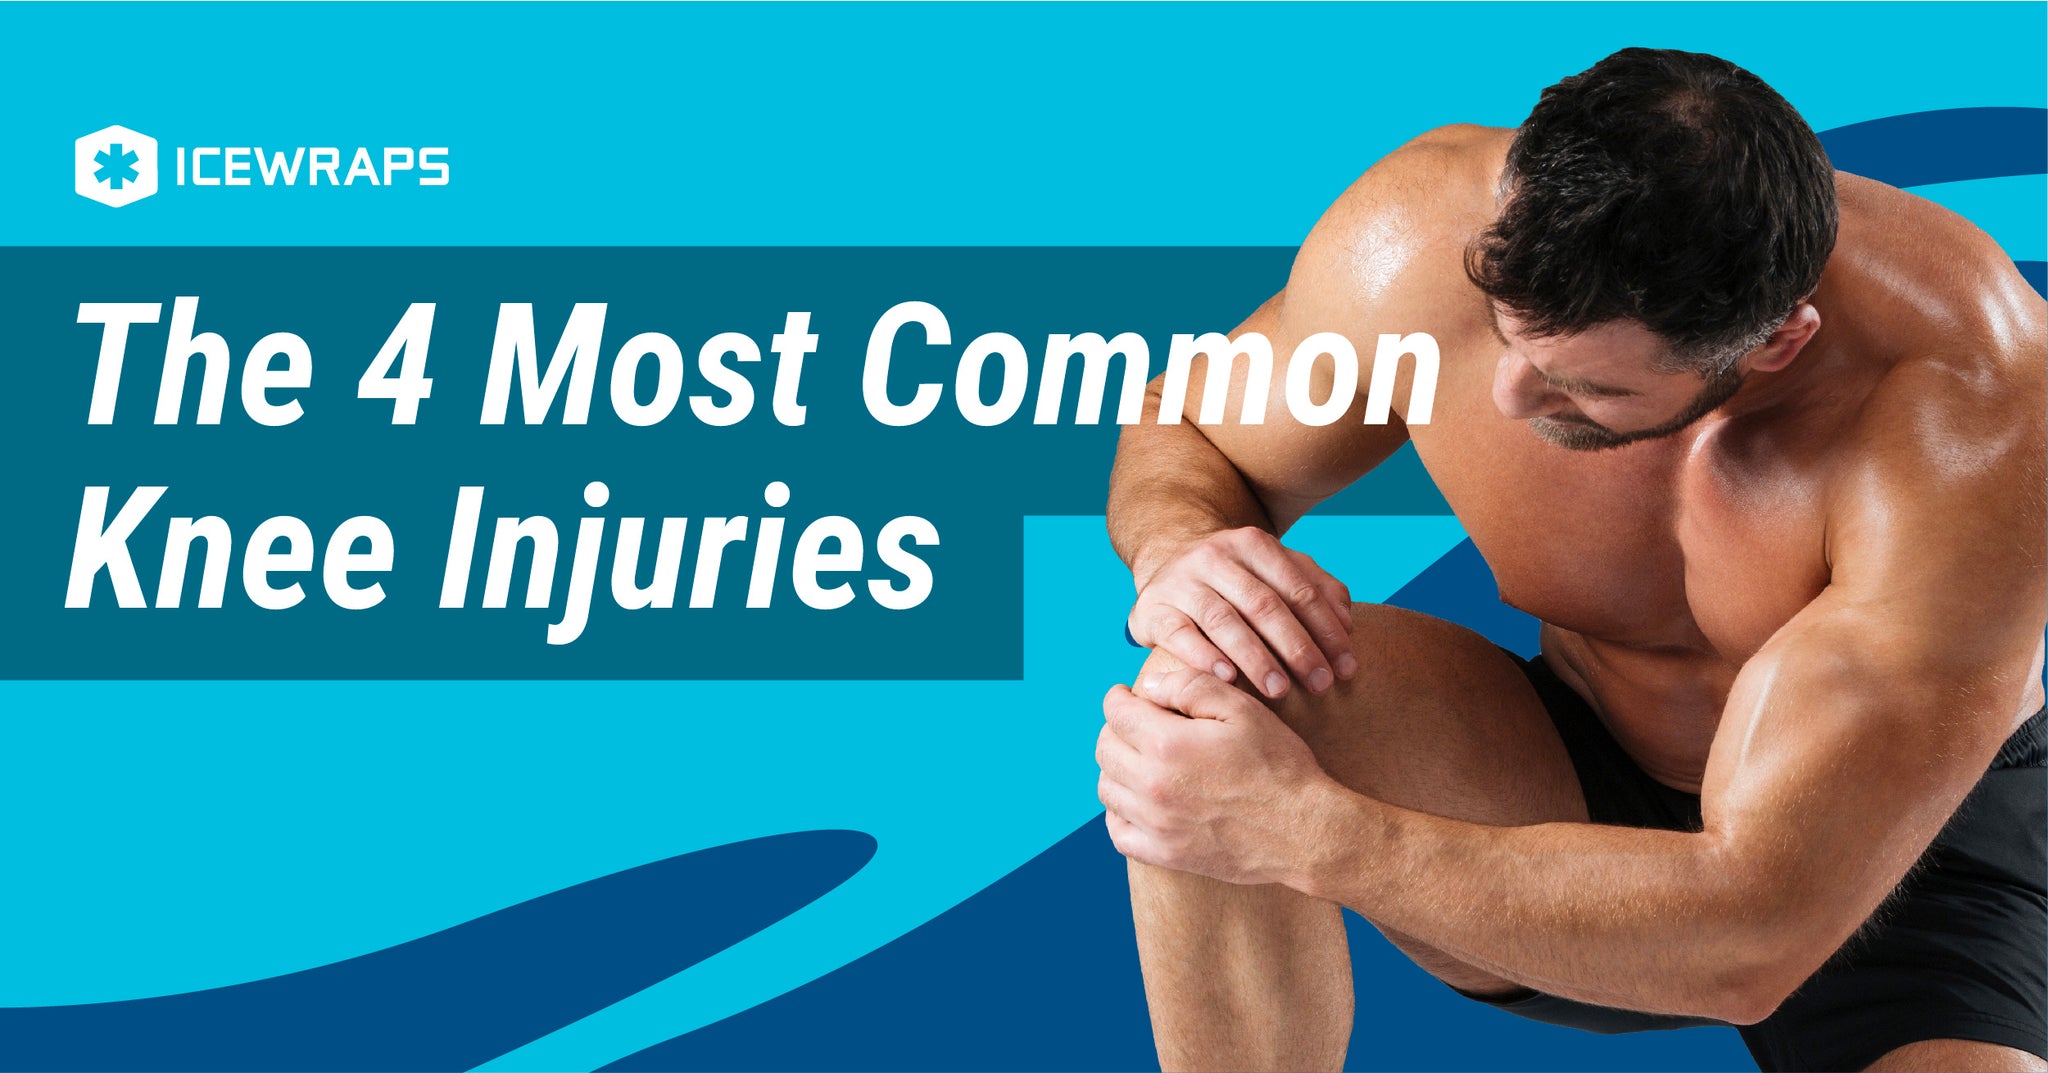 The 4 Most Common Knee Injuries Icewraps